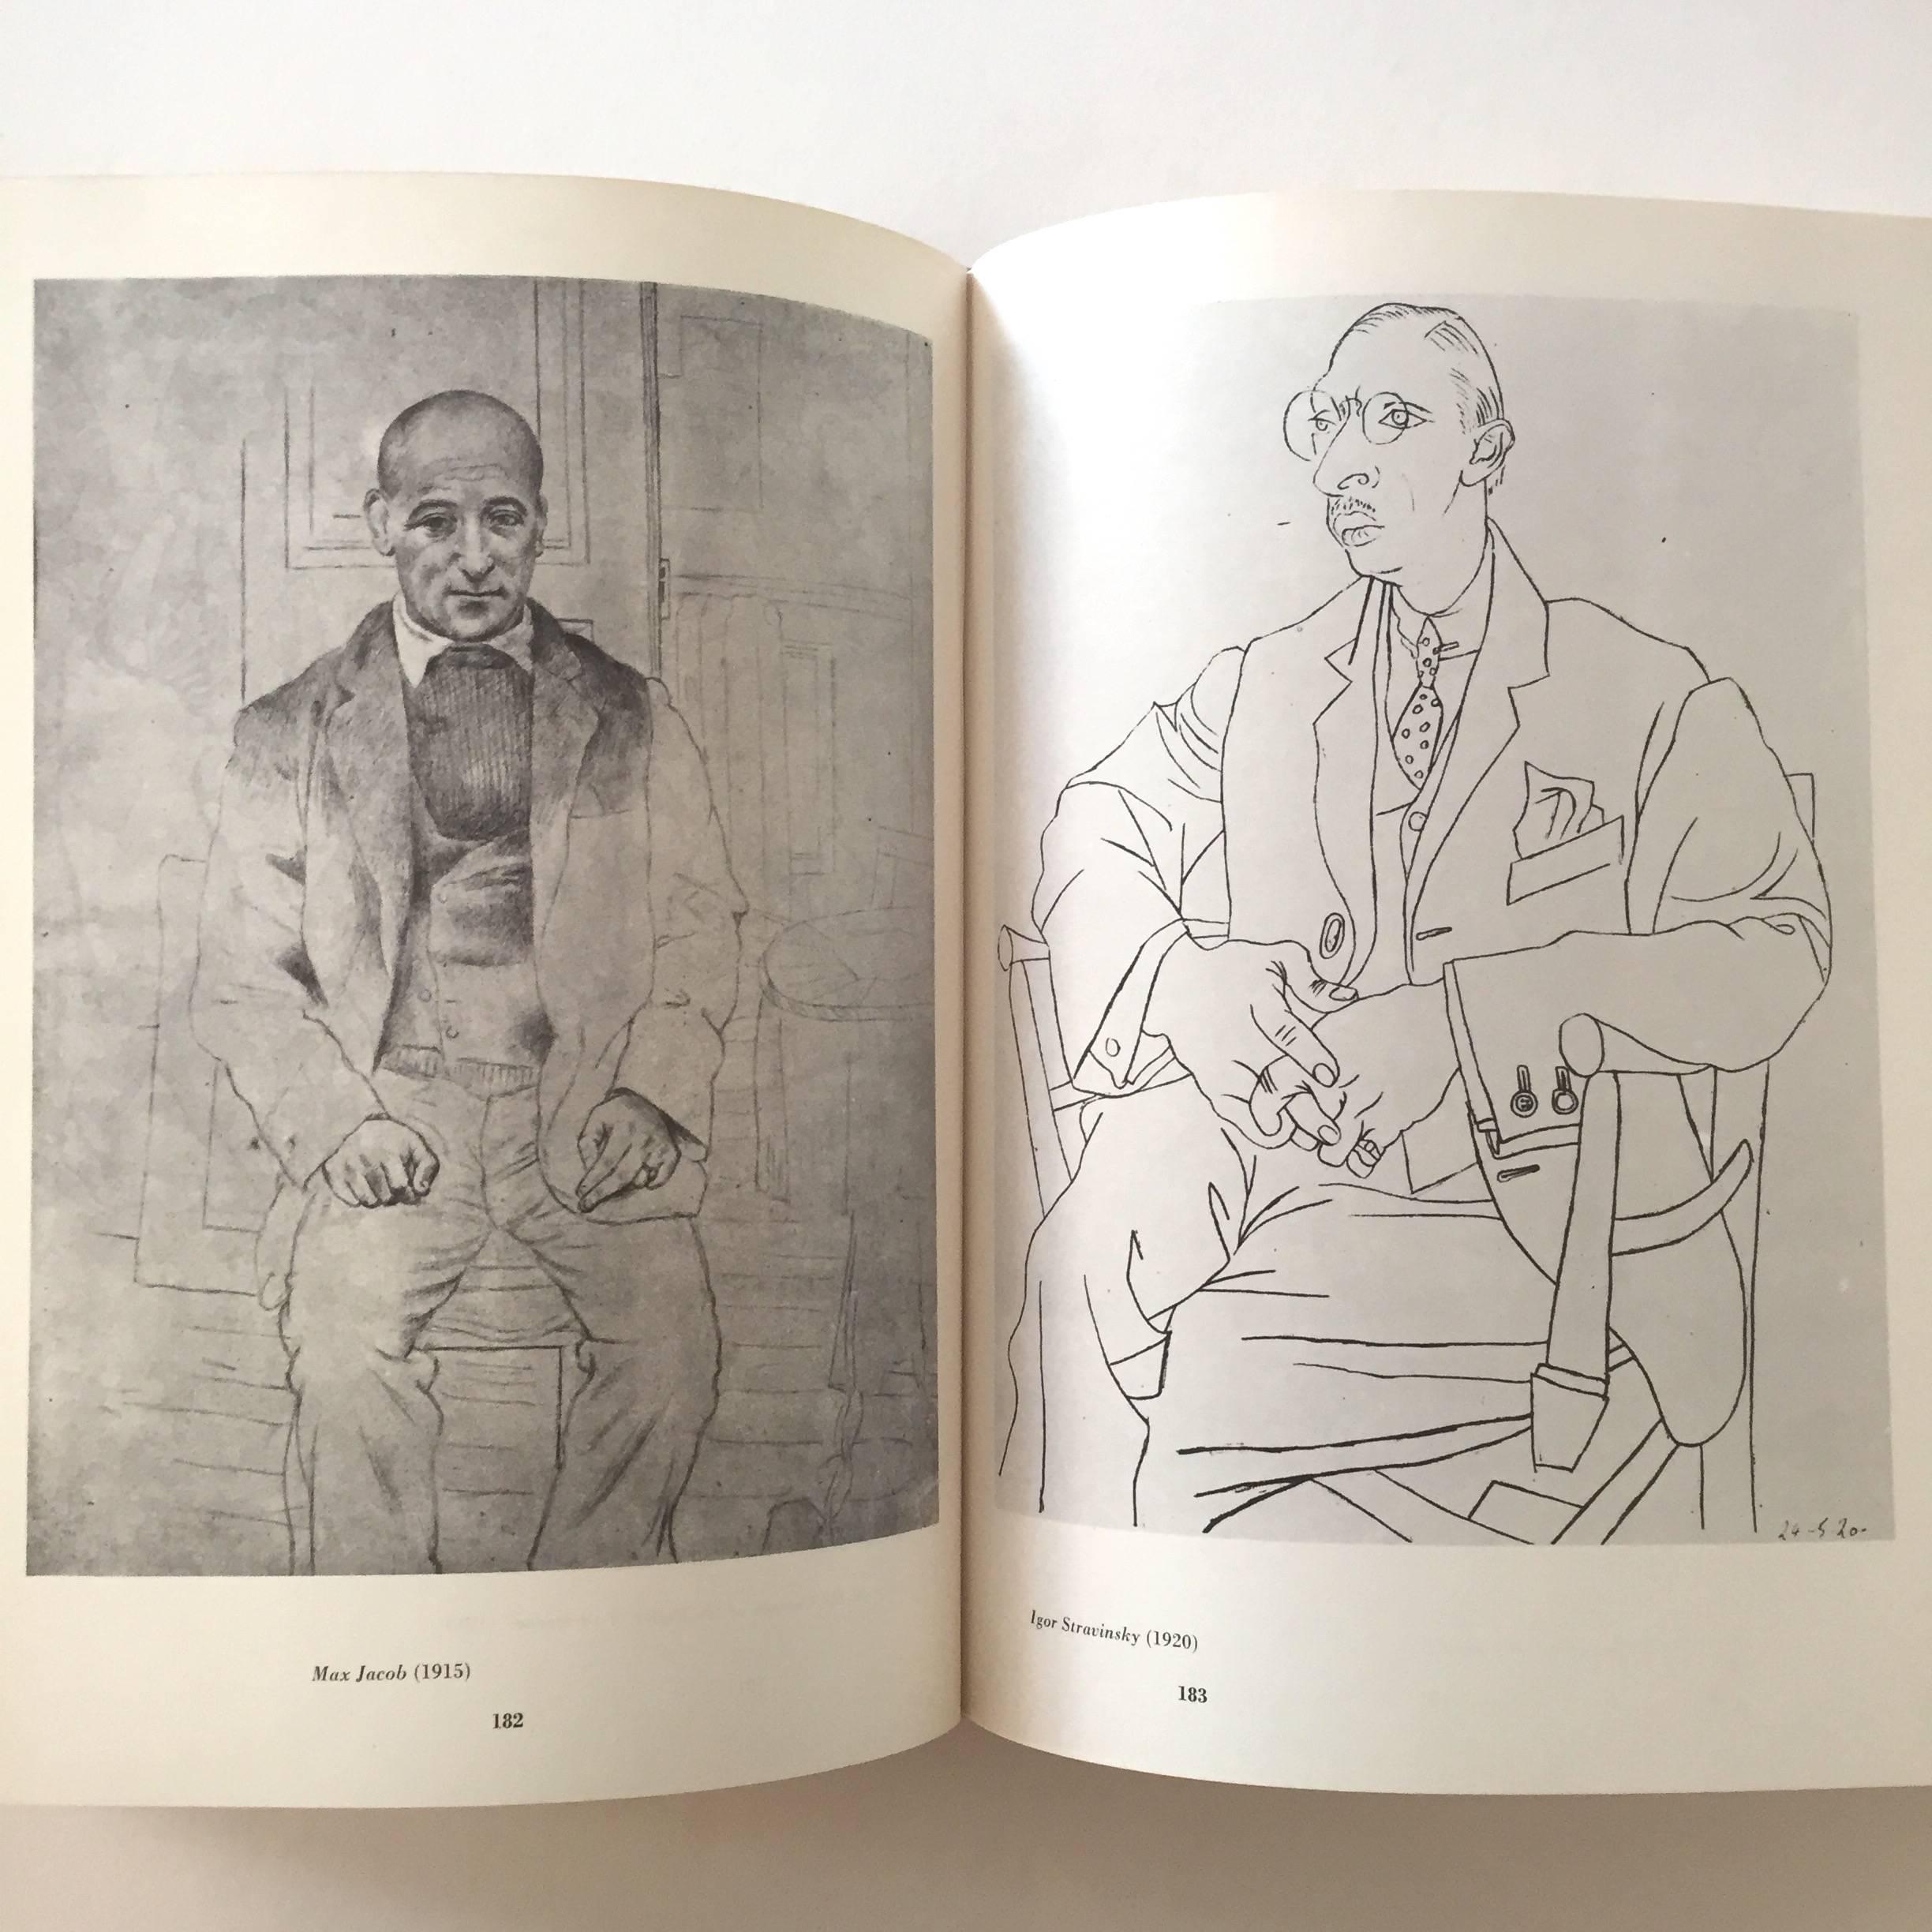 American Pablo Picasso - a stunning monograph 1955